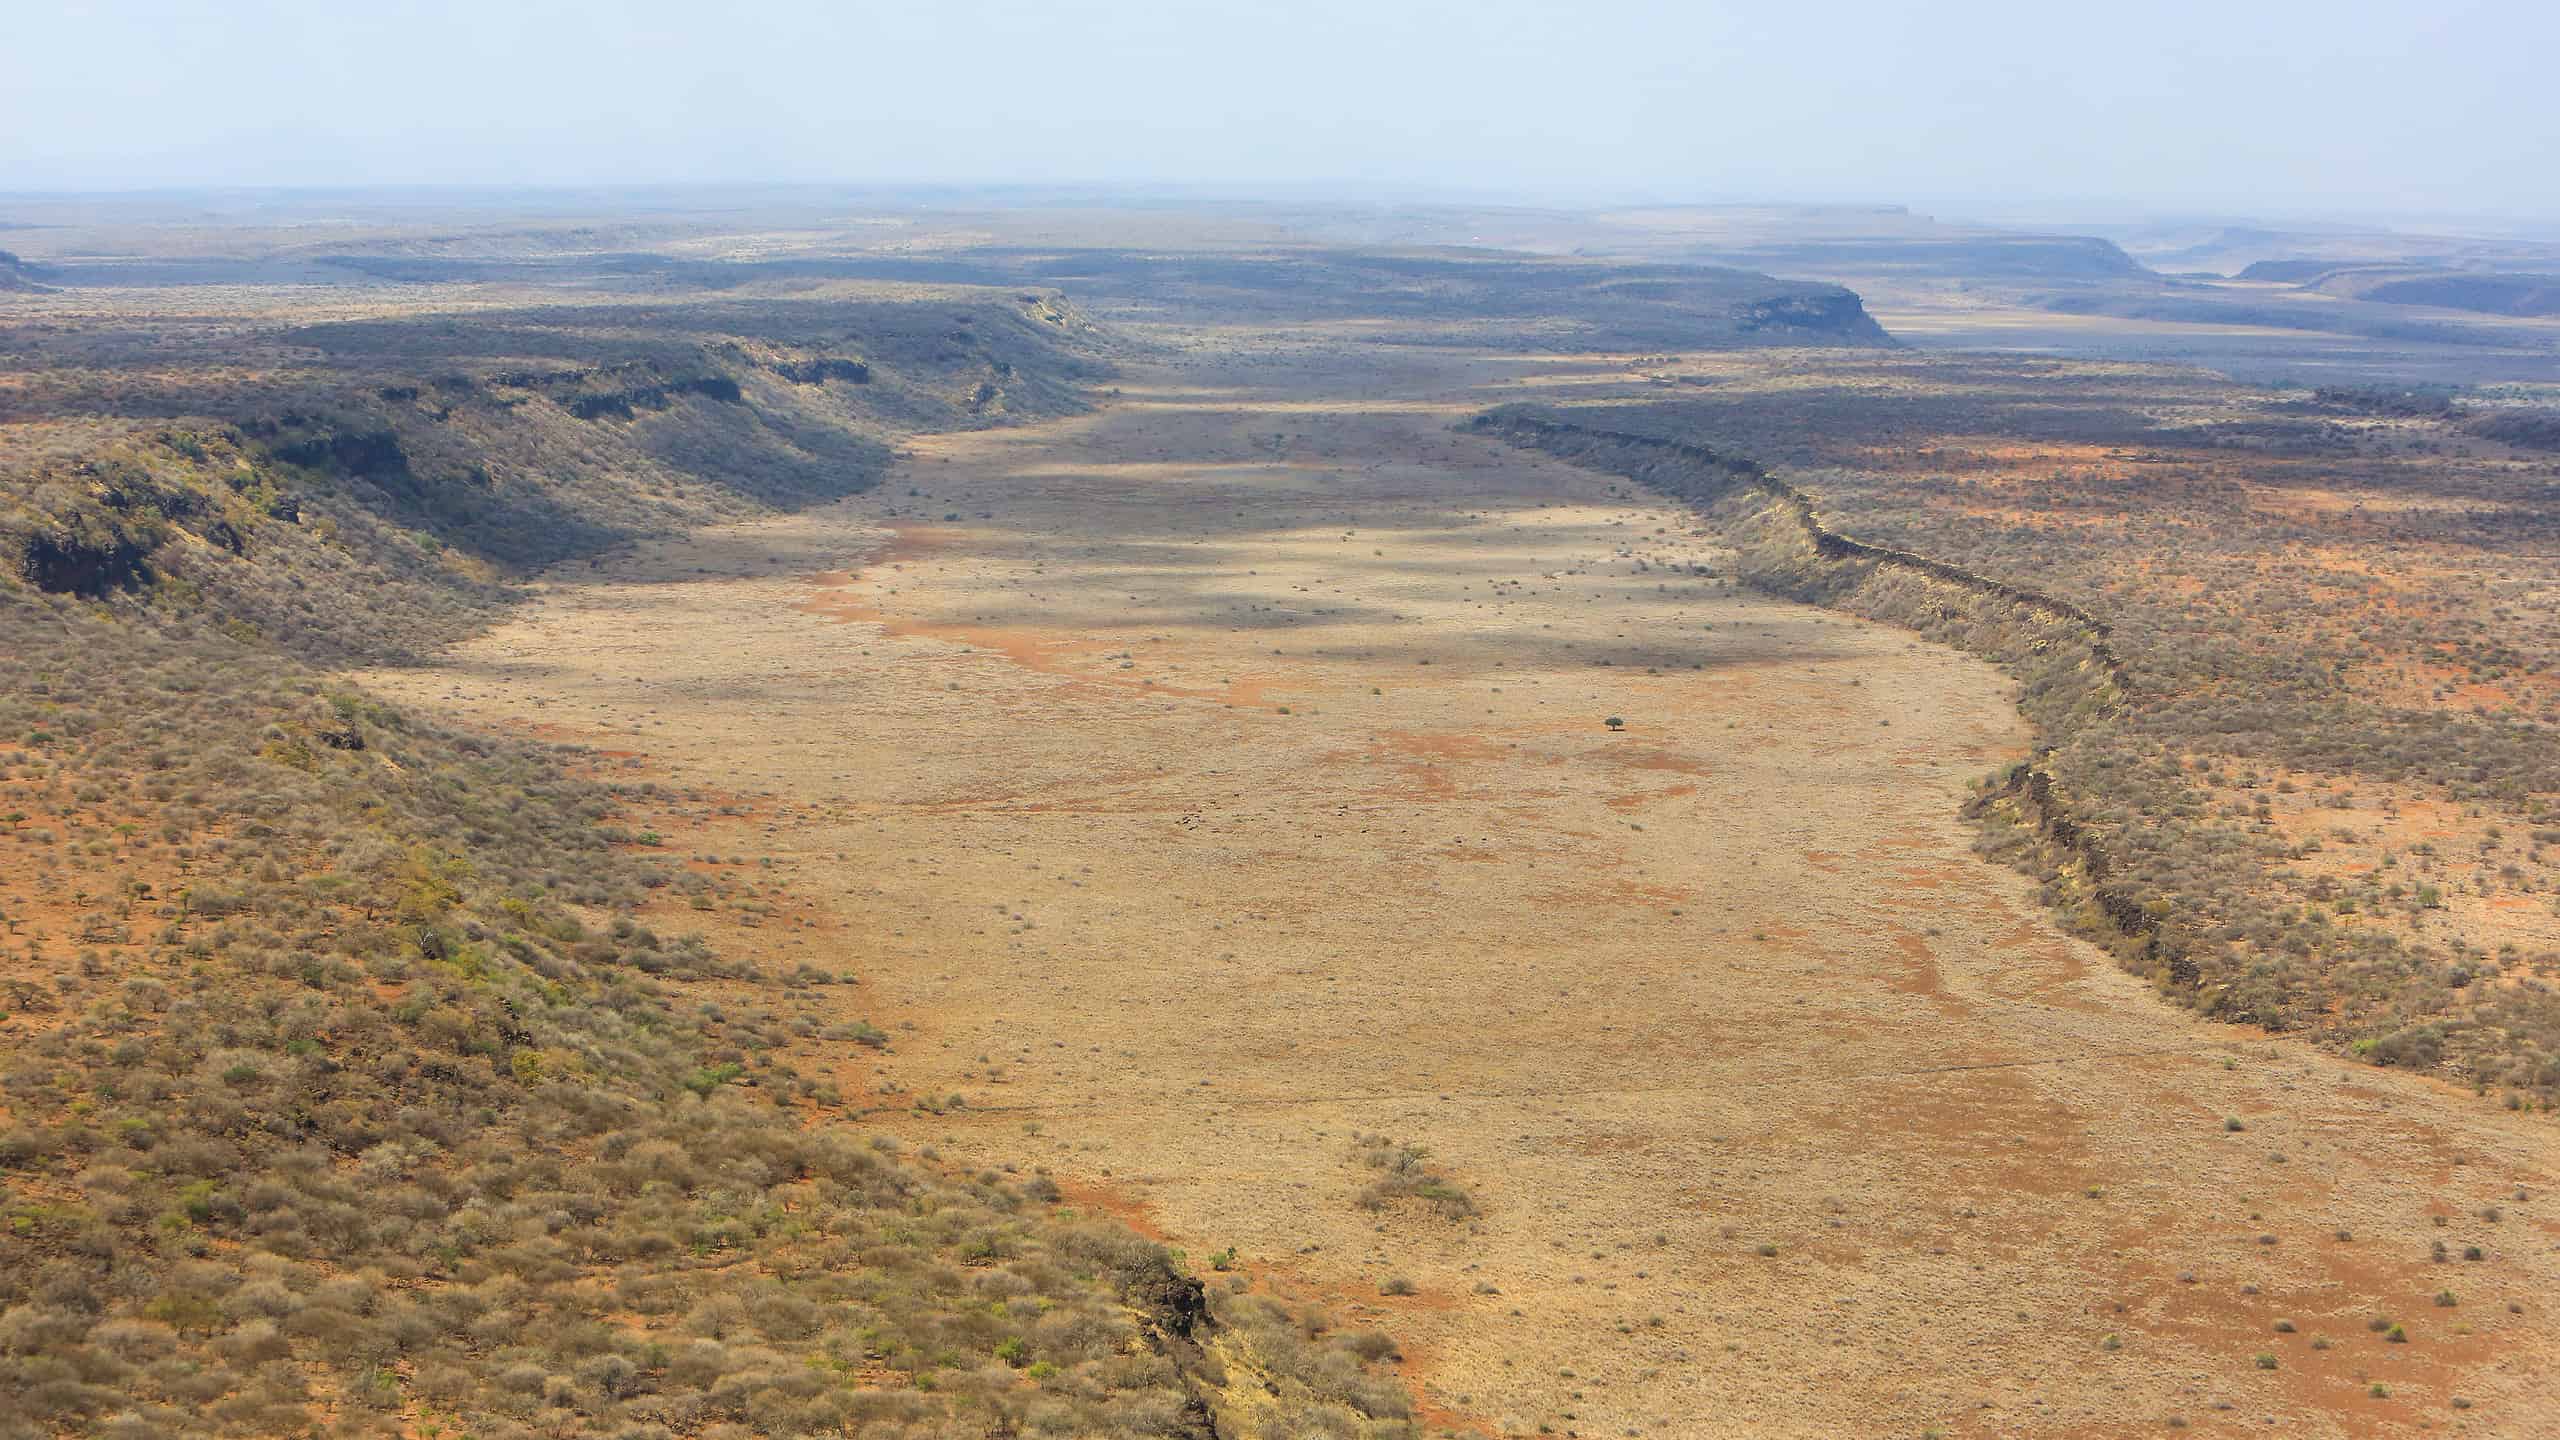 The Great Rift Valley stretches through multiple countries, including Tanzania, Kenya, and Ethiopia